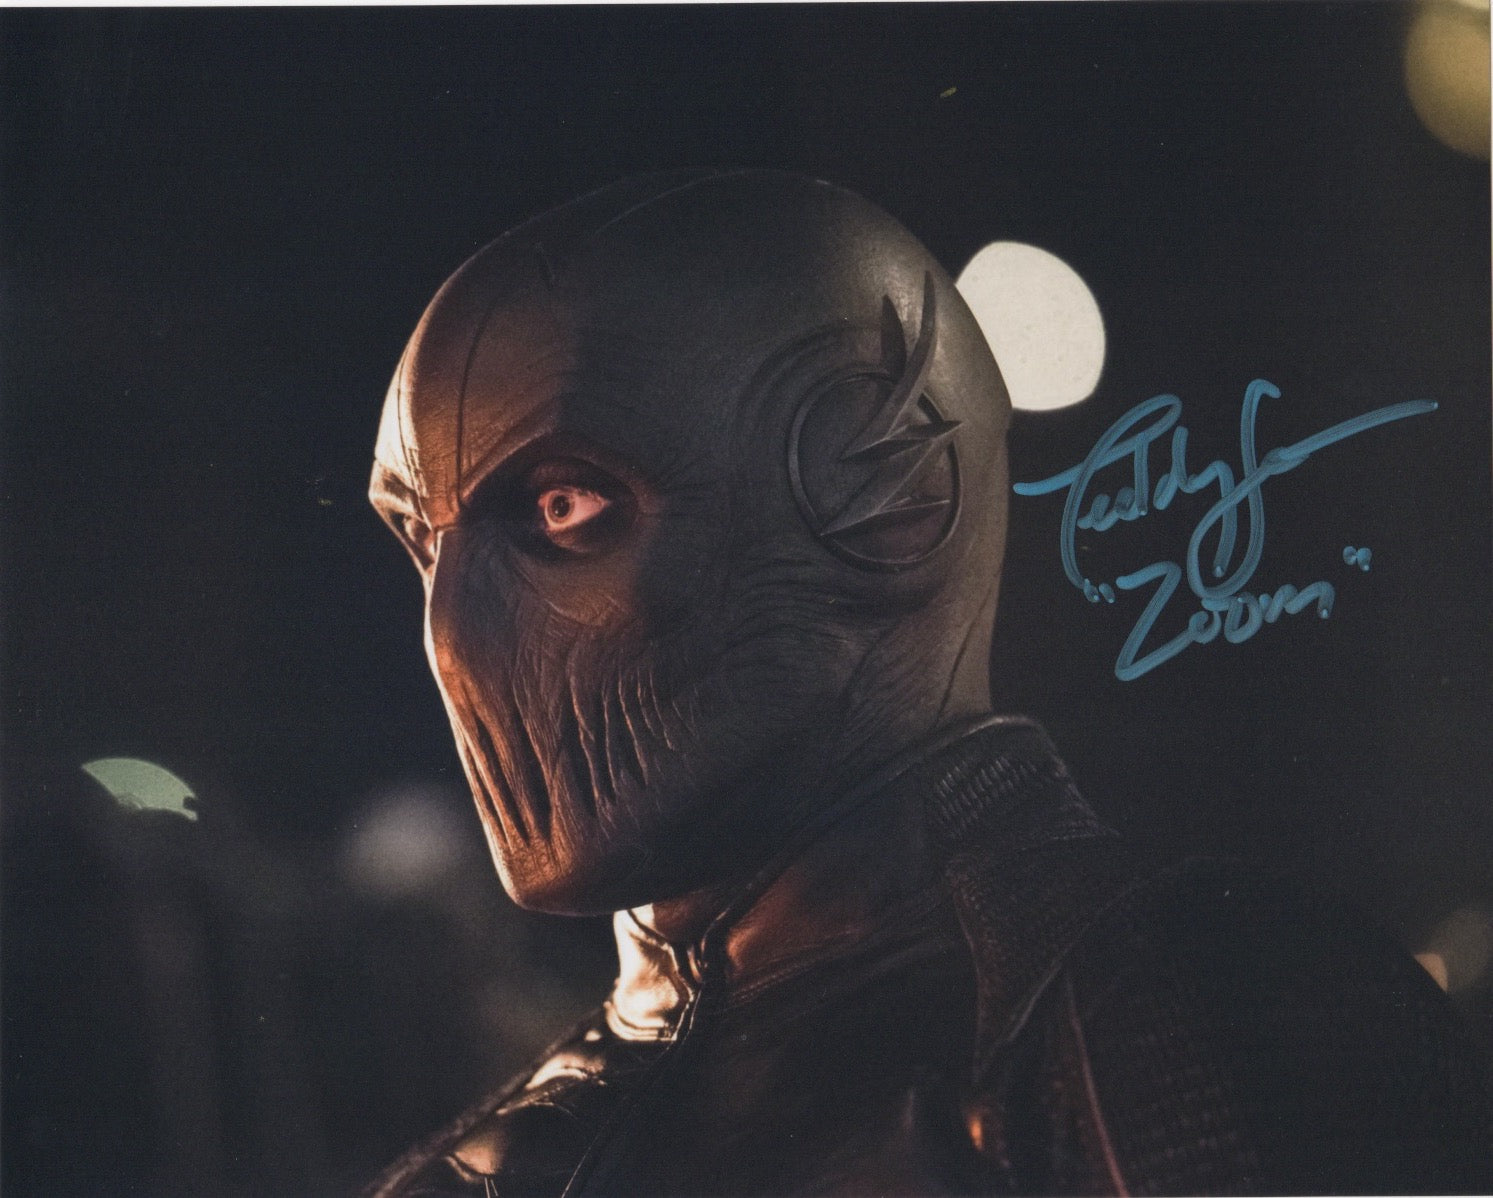 Teddy Sears The Flash Signed Autograph Zoom 8x10 Photo #4 - Outlaw Hobbies Authentic Autographs